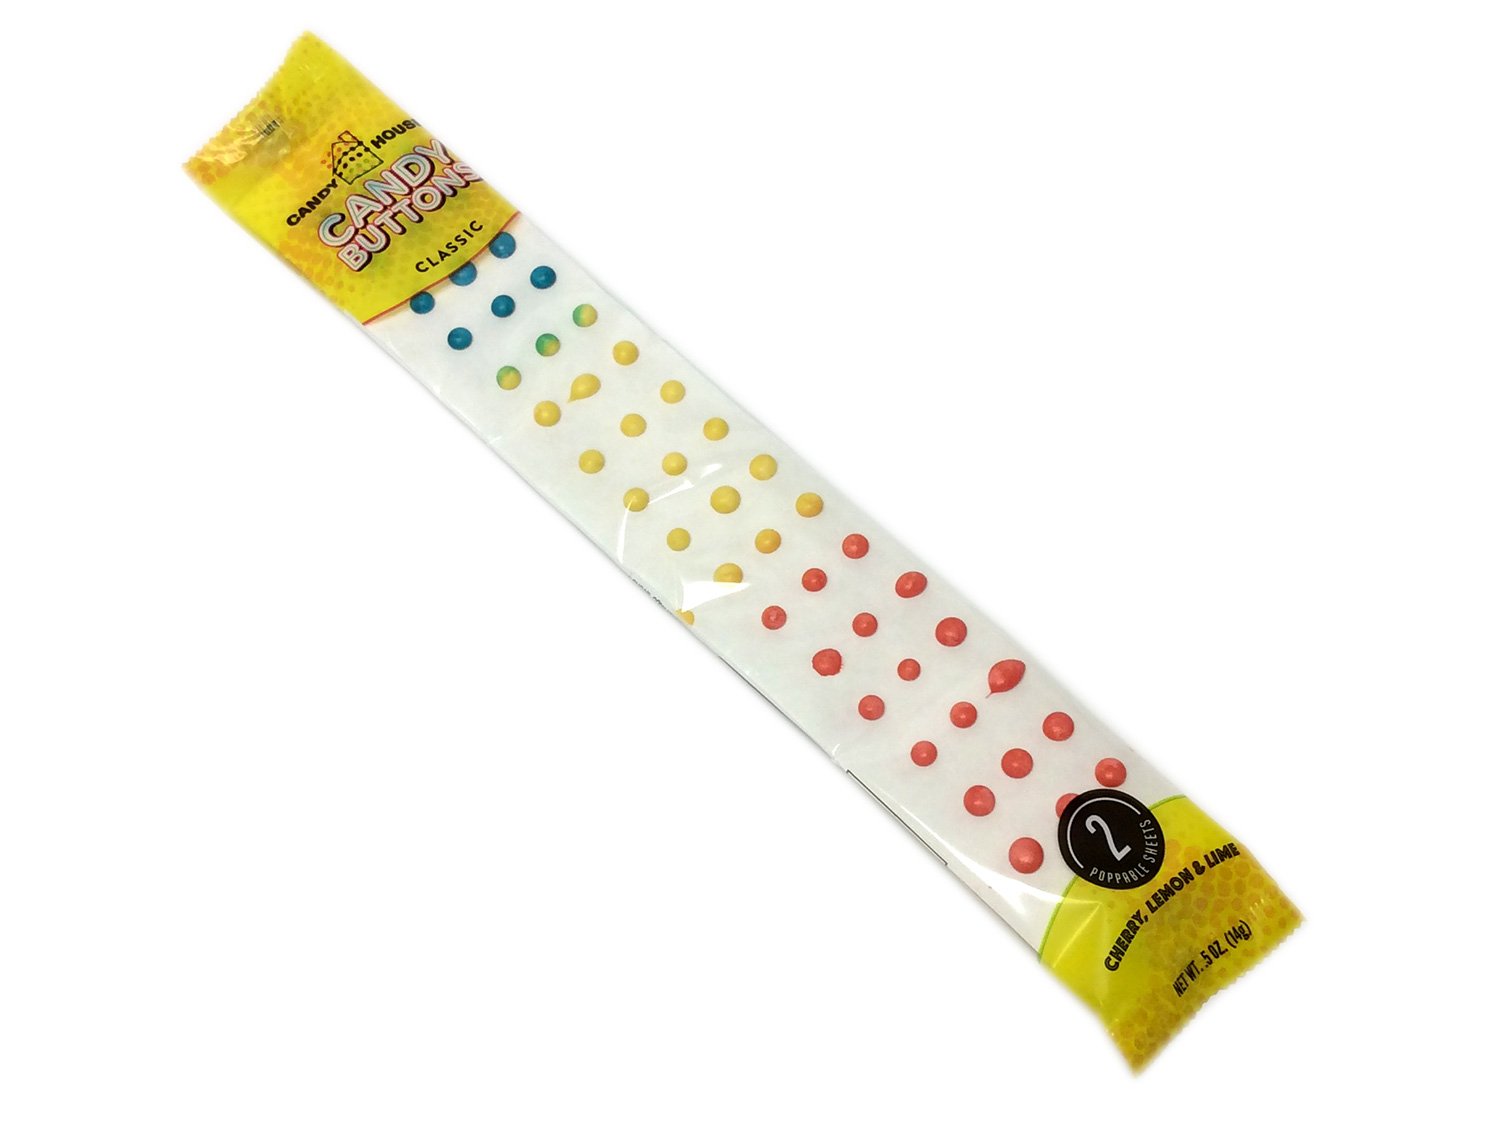 Necco Old Fashioned Candy Buttons